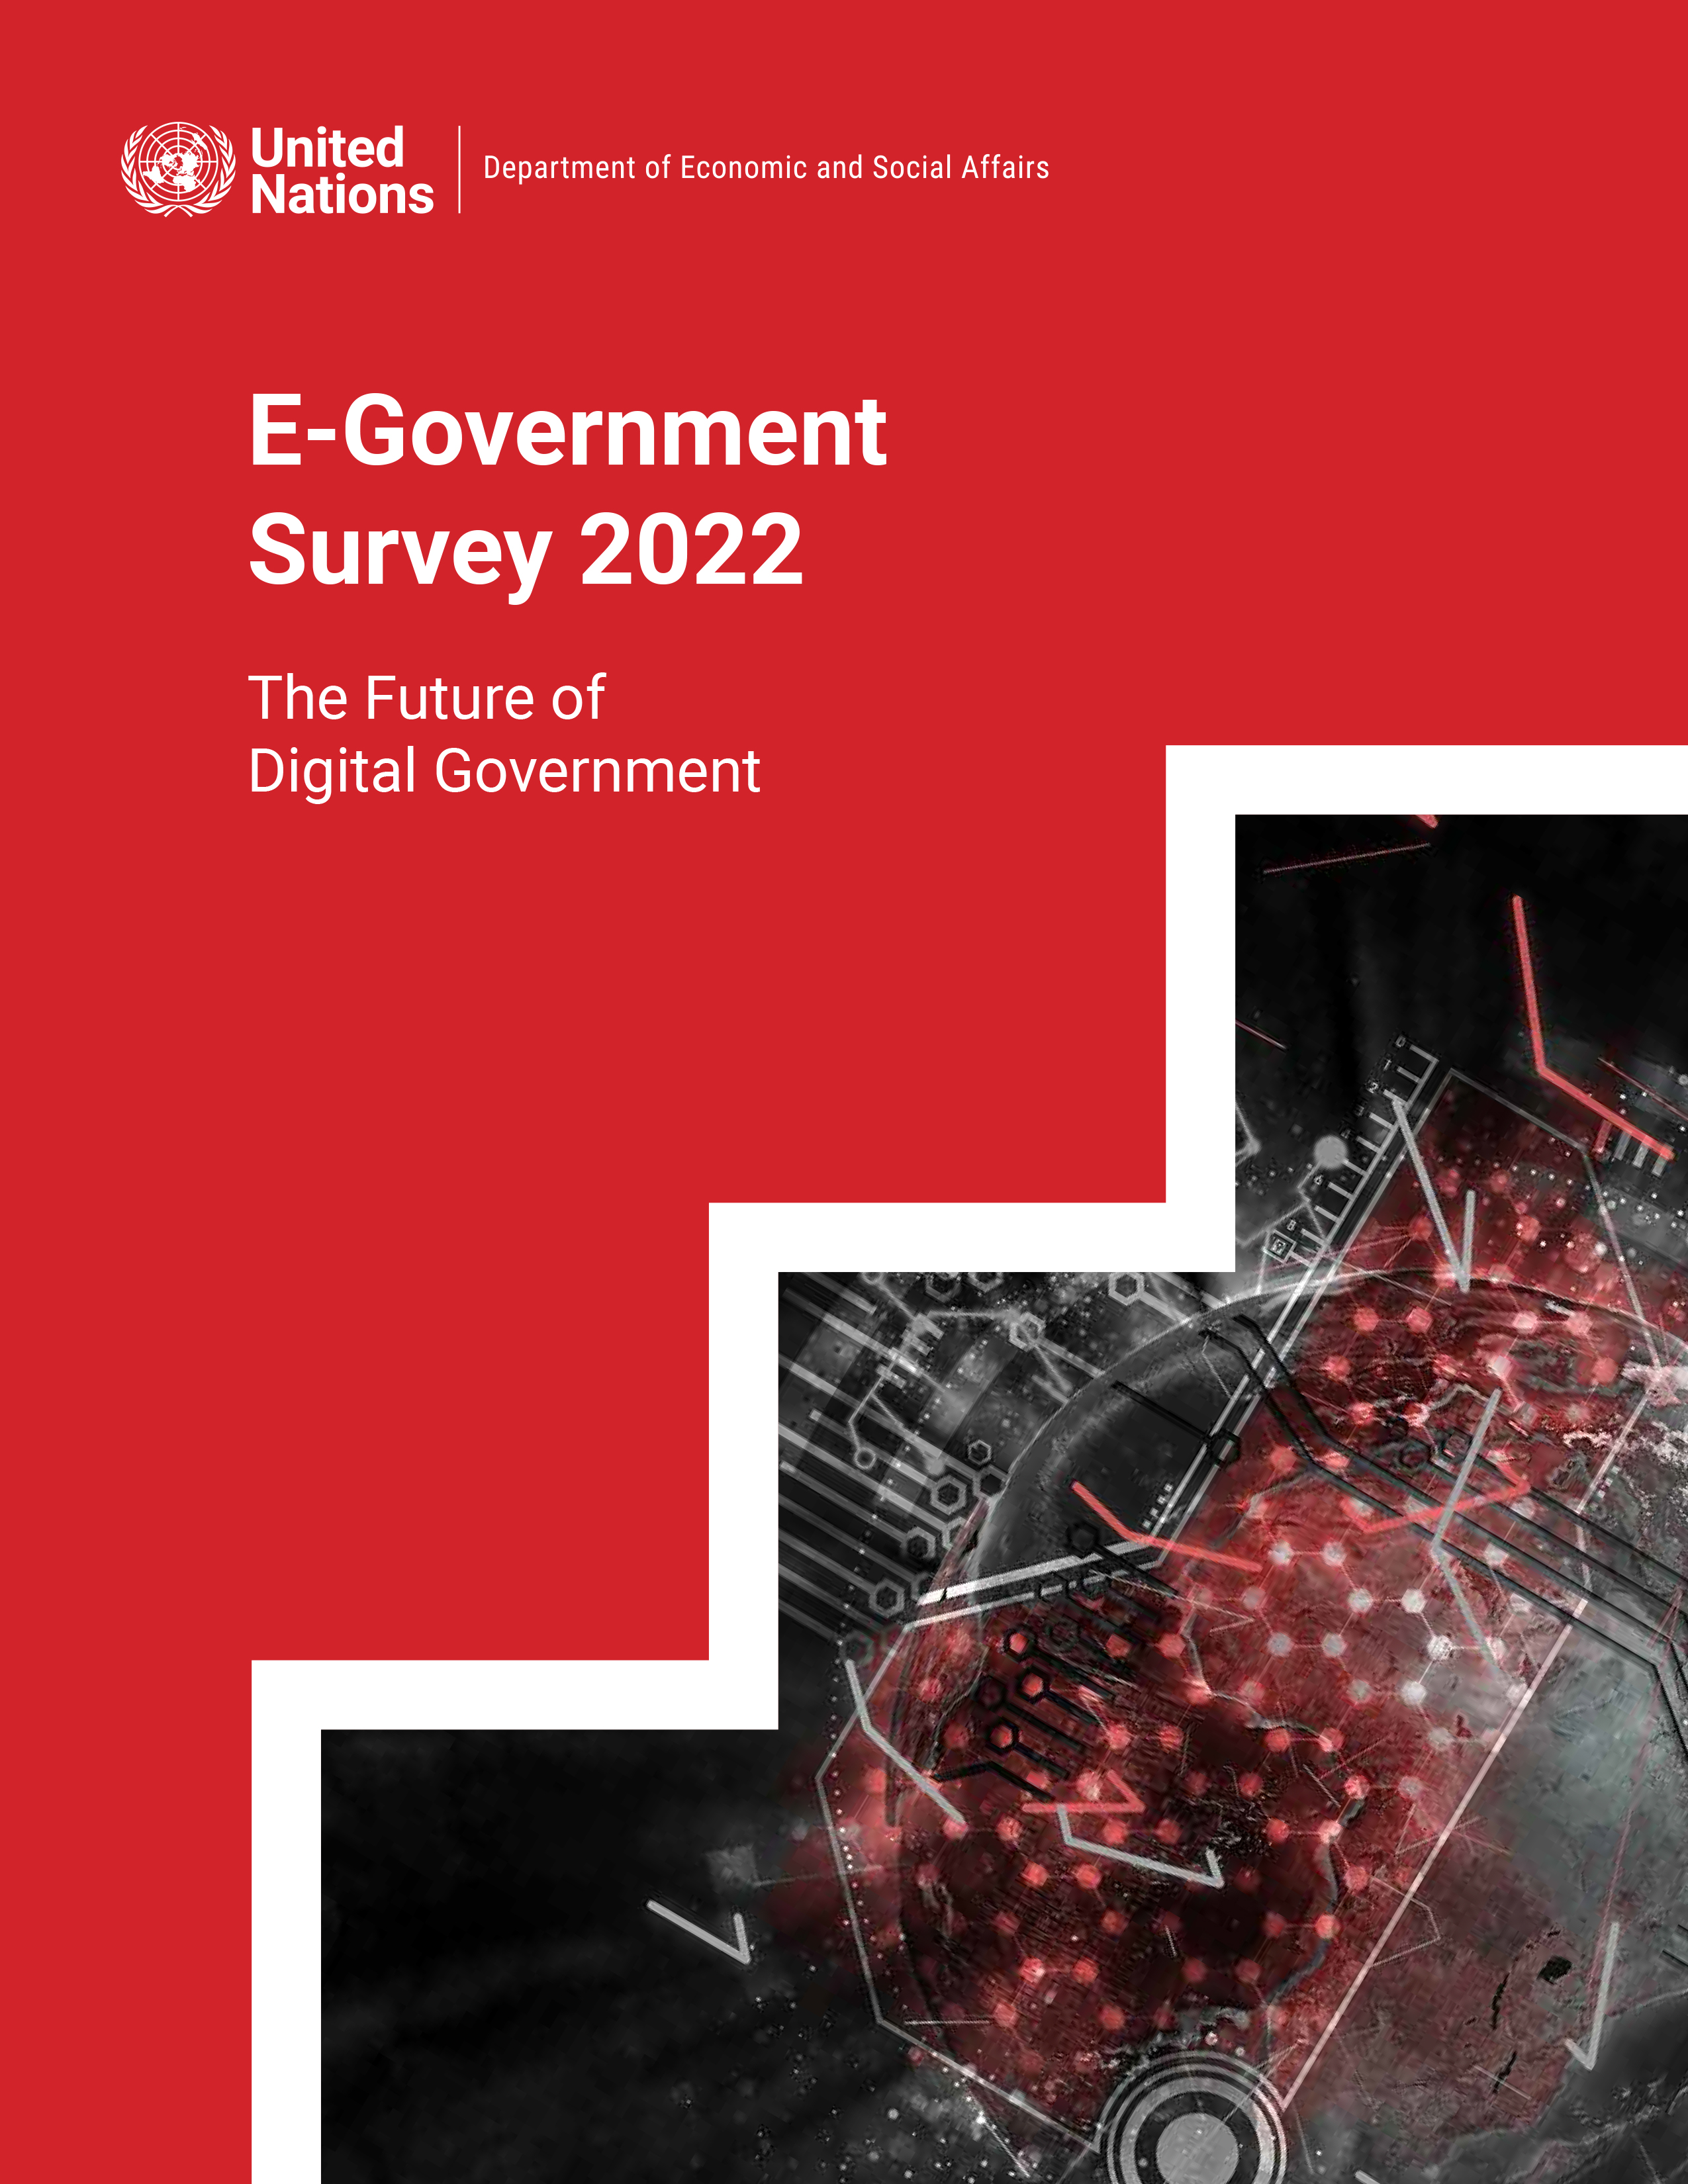 image of United Nations E-Government Survey 2022